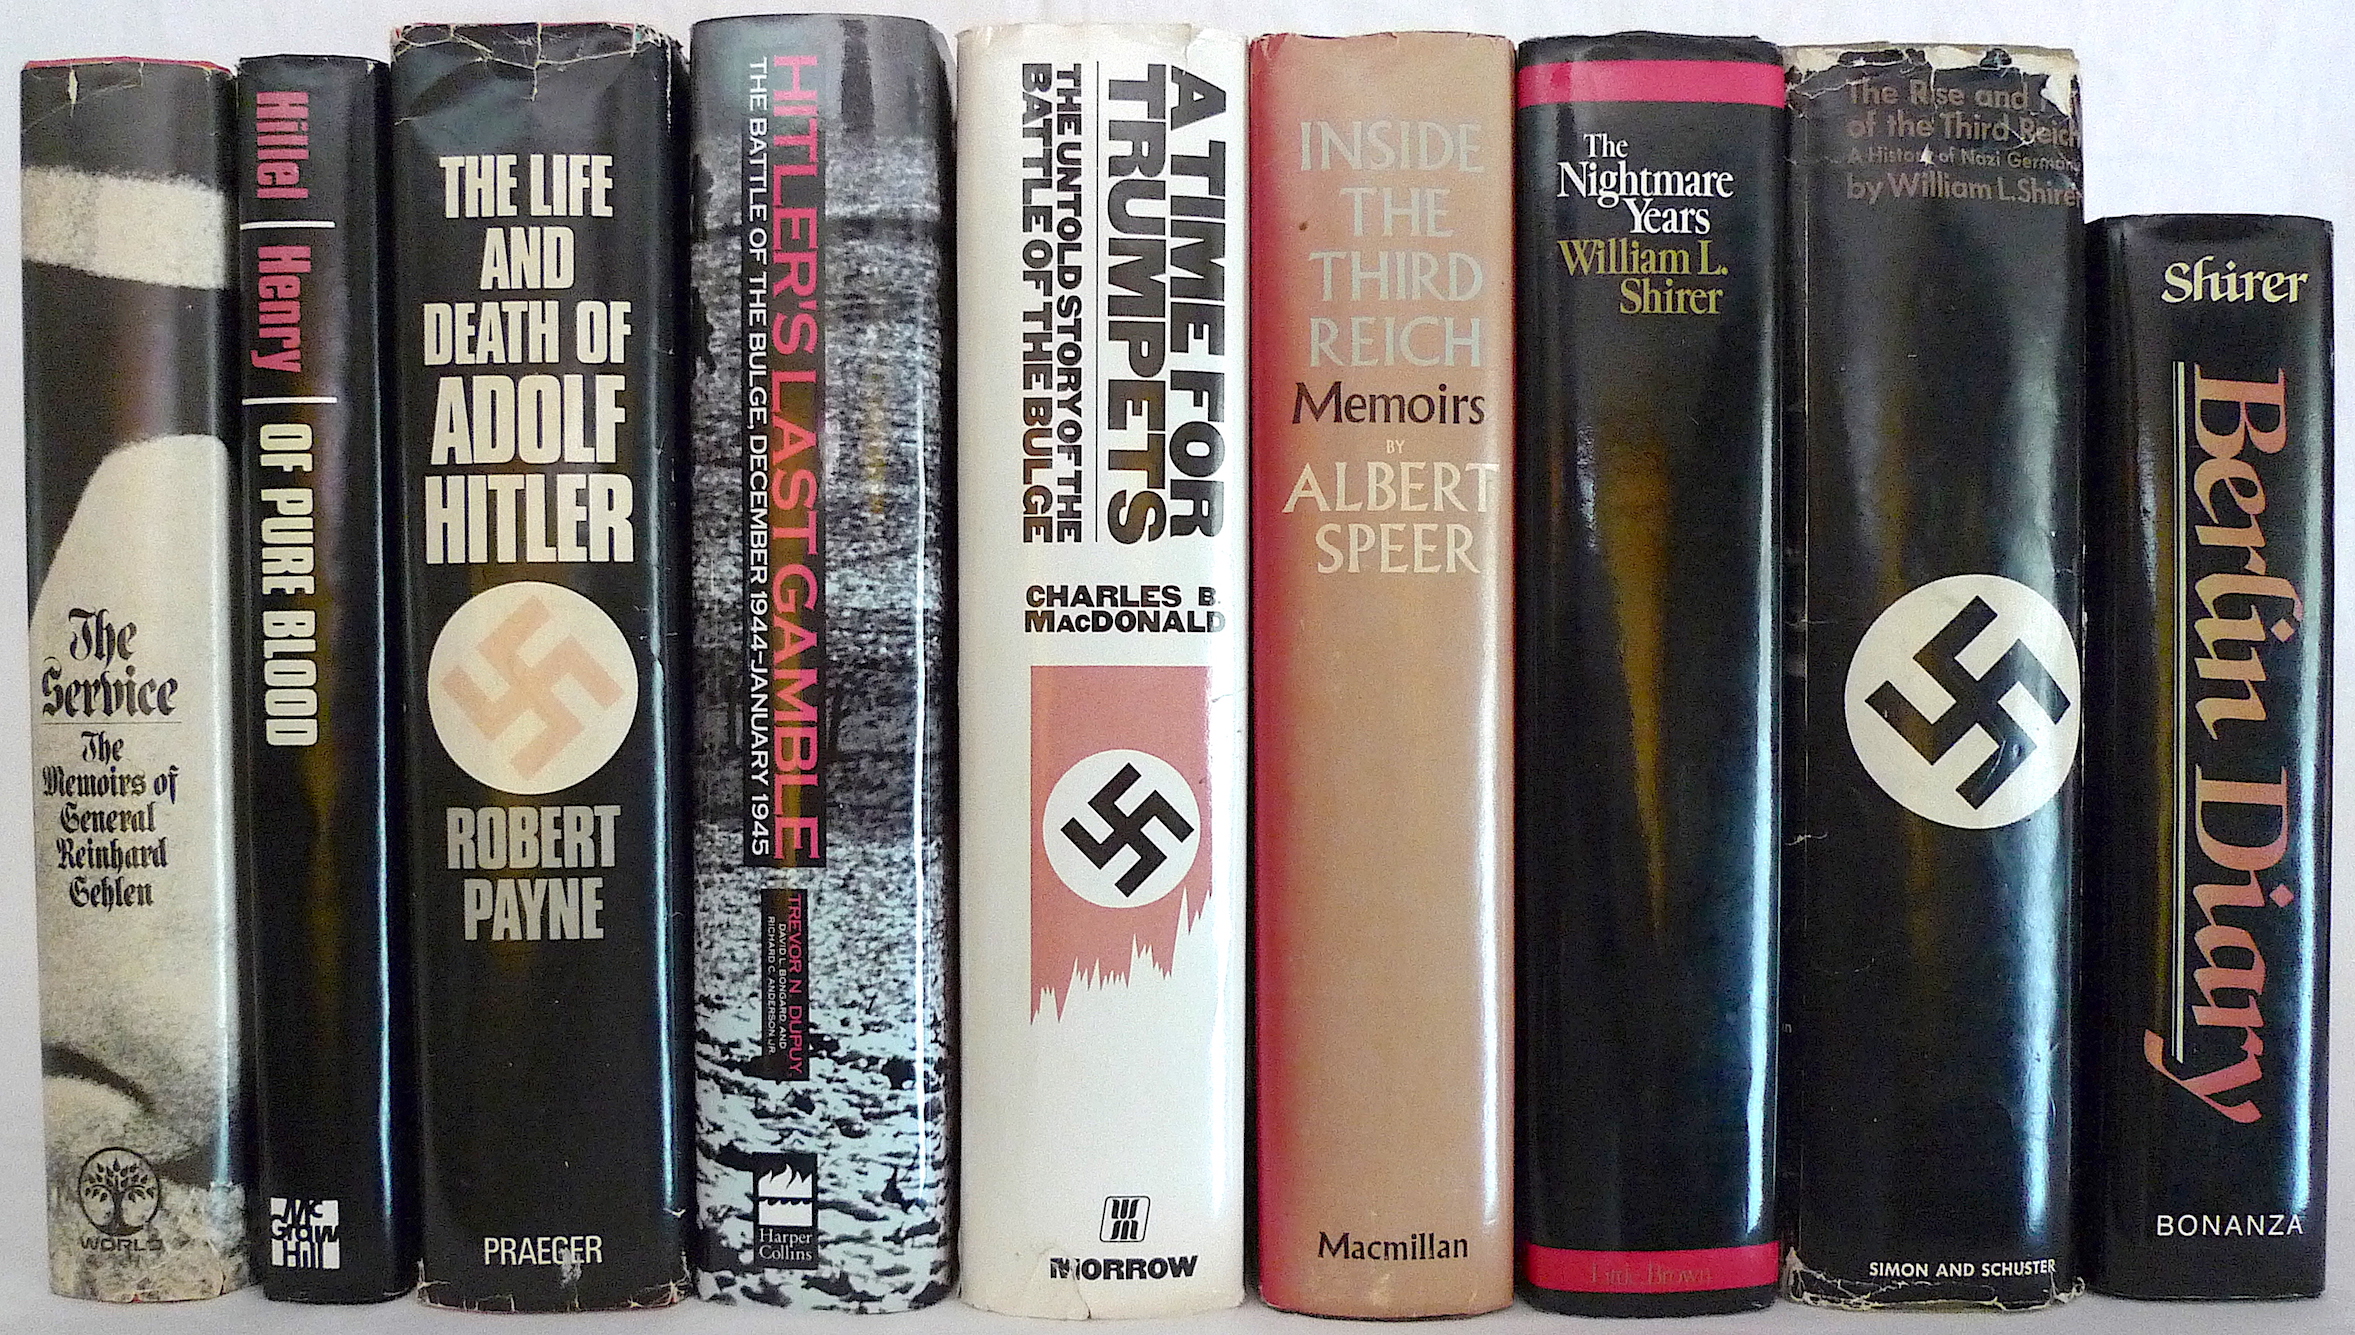 20th Century Historical Accounts of Nazi Germany (1960-1985) - 9 Books; Hitler's Last Gamble: The Battle of the Bulge December 1944-January 1945 by Trevor N. Dupuy, Of Pure Blood by Mark Hillel, The Service The Memoirs of General Reinhard Gehlen translated by David Irving, A Time for Trumpets The Untold Story of the Bulge by Charles B. MacDonald, Berlin Diary/The Nightmare Years: 1930-1940/The Rise and Fall of the Third Reich by William L. Shirer, Inside the Third Reich Memoirs by Albert Speer, The Life and Death of Adolf Hitler by Robert Payne. - Various